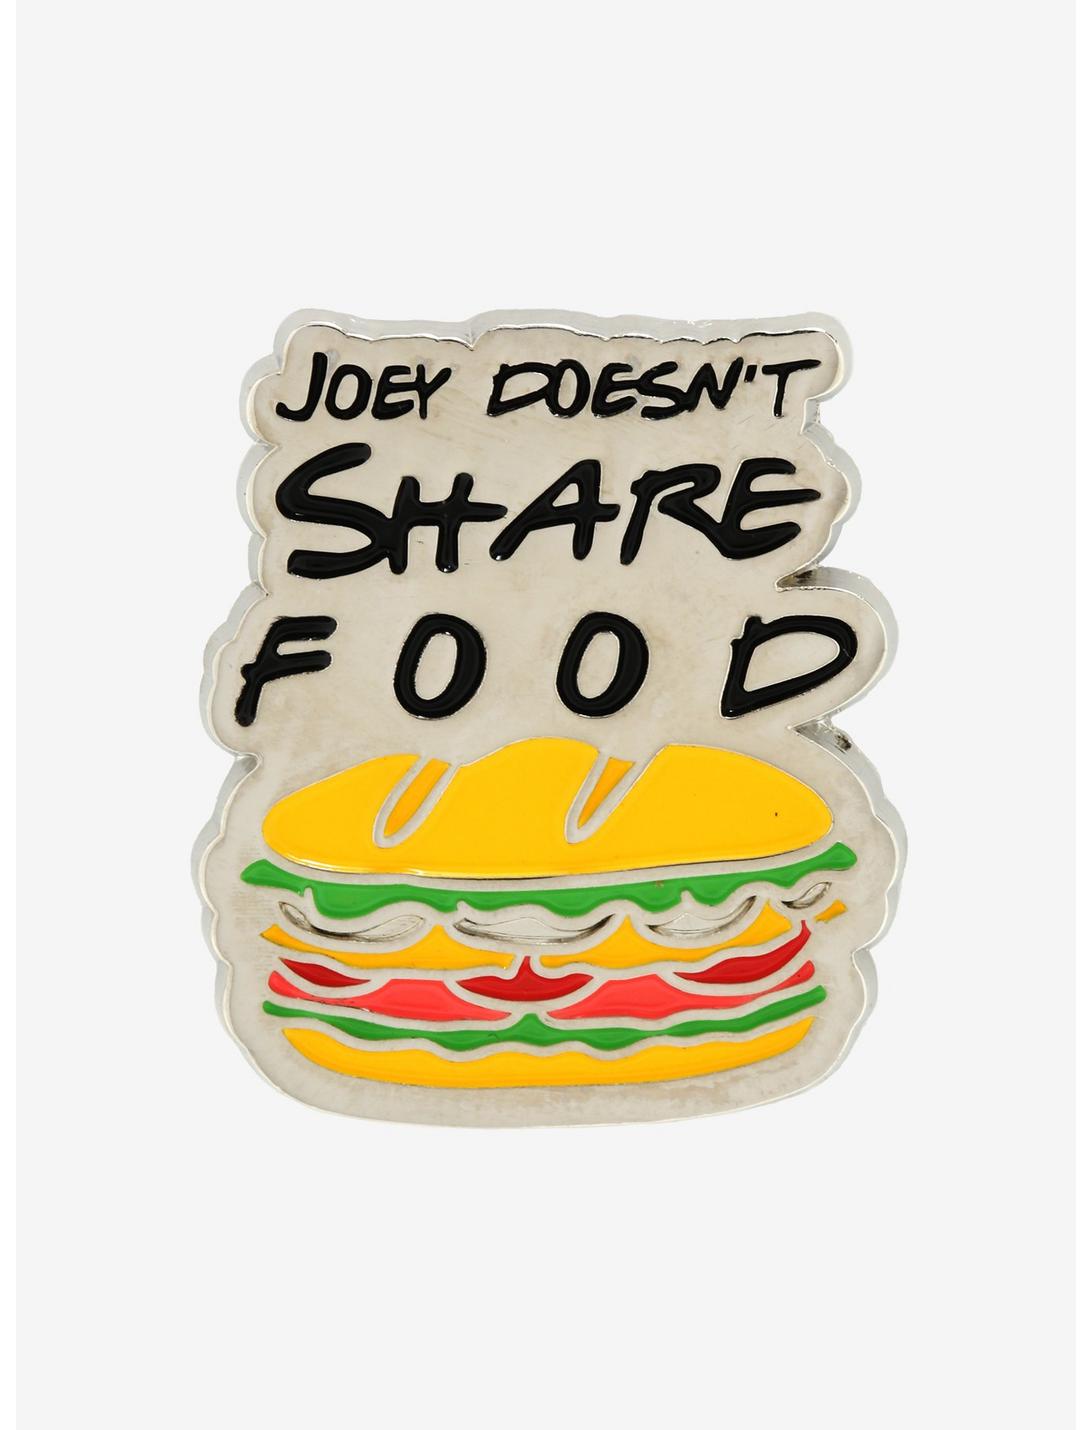 Friends Joey Doesn't Share Food Enamel Pin - BoxLunch Exclusive, , hi-res